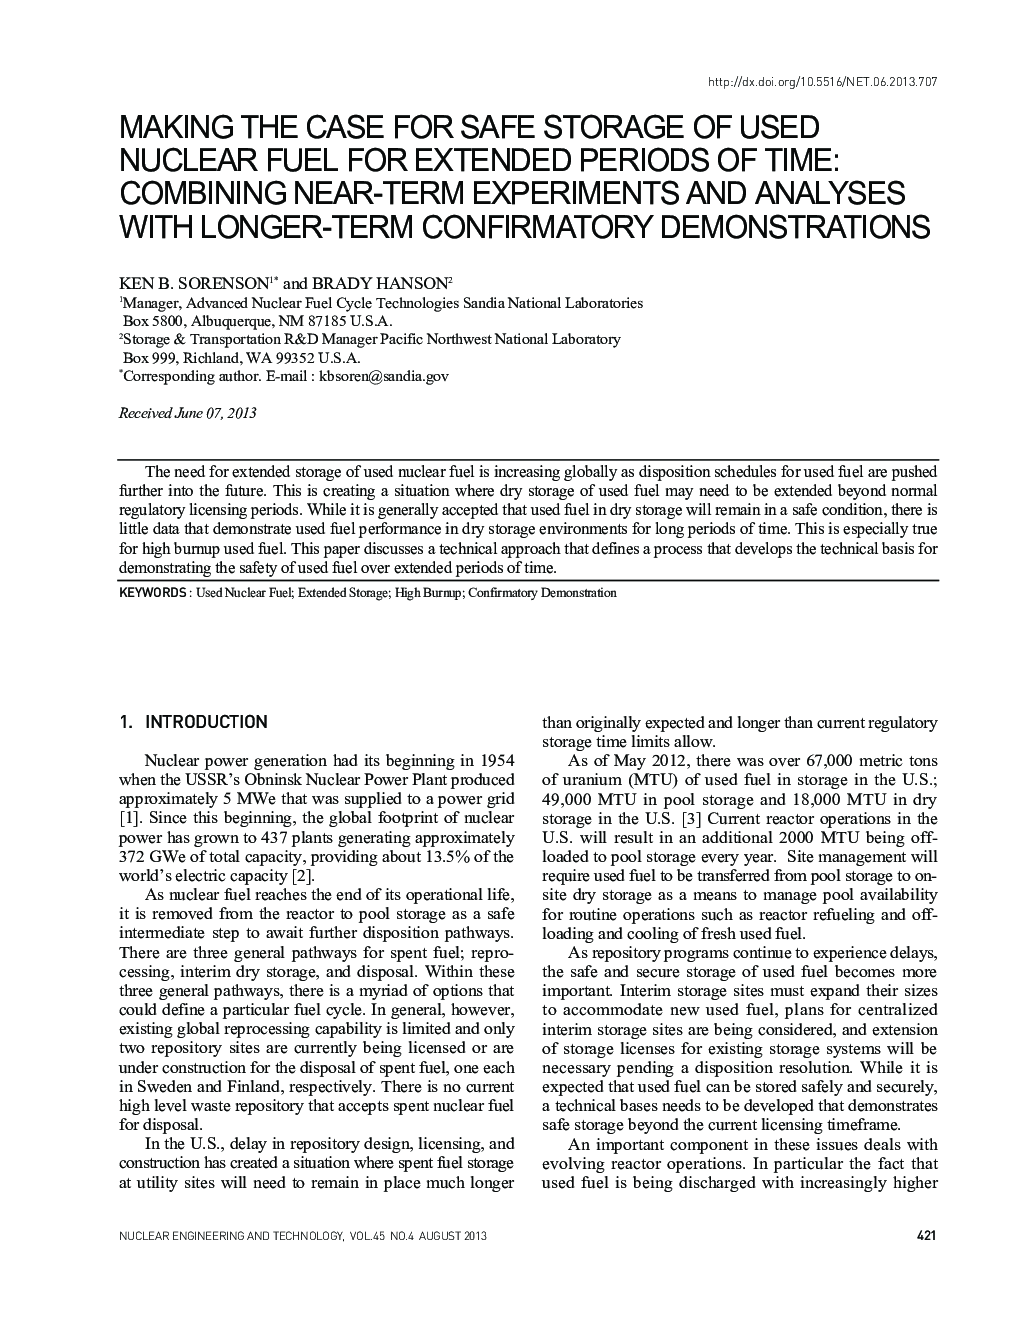 MAKING THE CASE FOR SAFE STORAGE OF USED NUCLEAR FUEL FOR EXTENDED PERIODS OF TIME: COMBINING NEAR-TERM EXPERIMENTS AND ANALYSES WITH LONGER-TERM CONFIRMATORY DEMONSTRATIONS